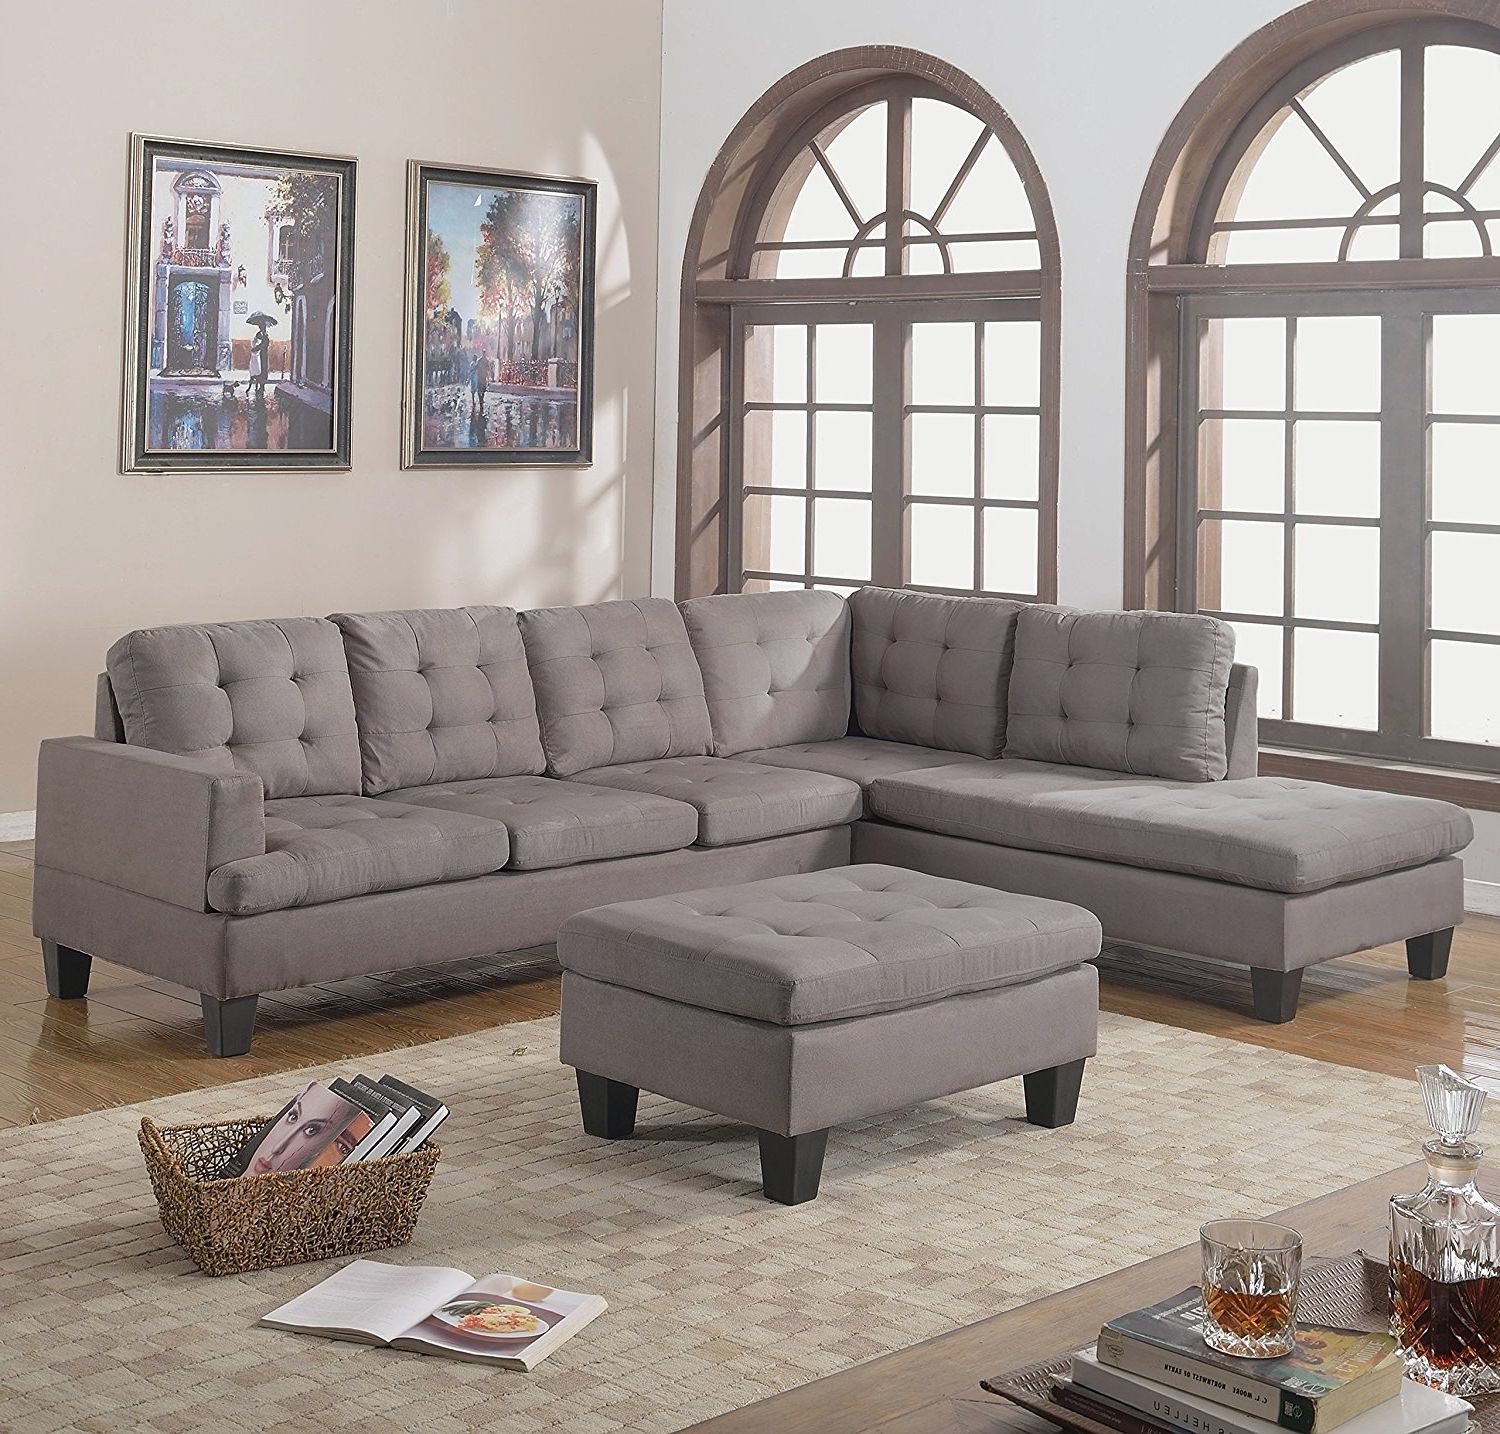 Furniture : American Furniture Warehouse 470 Living Room Furniture Regarding Recent St Cloud Mn Sectional Sofas (Photo 8 of 15)